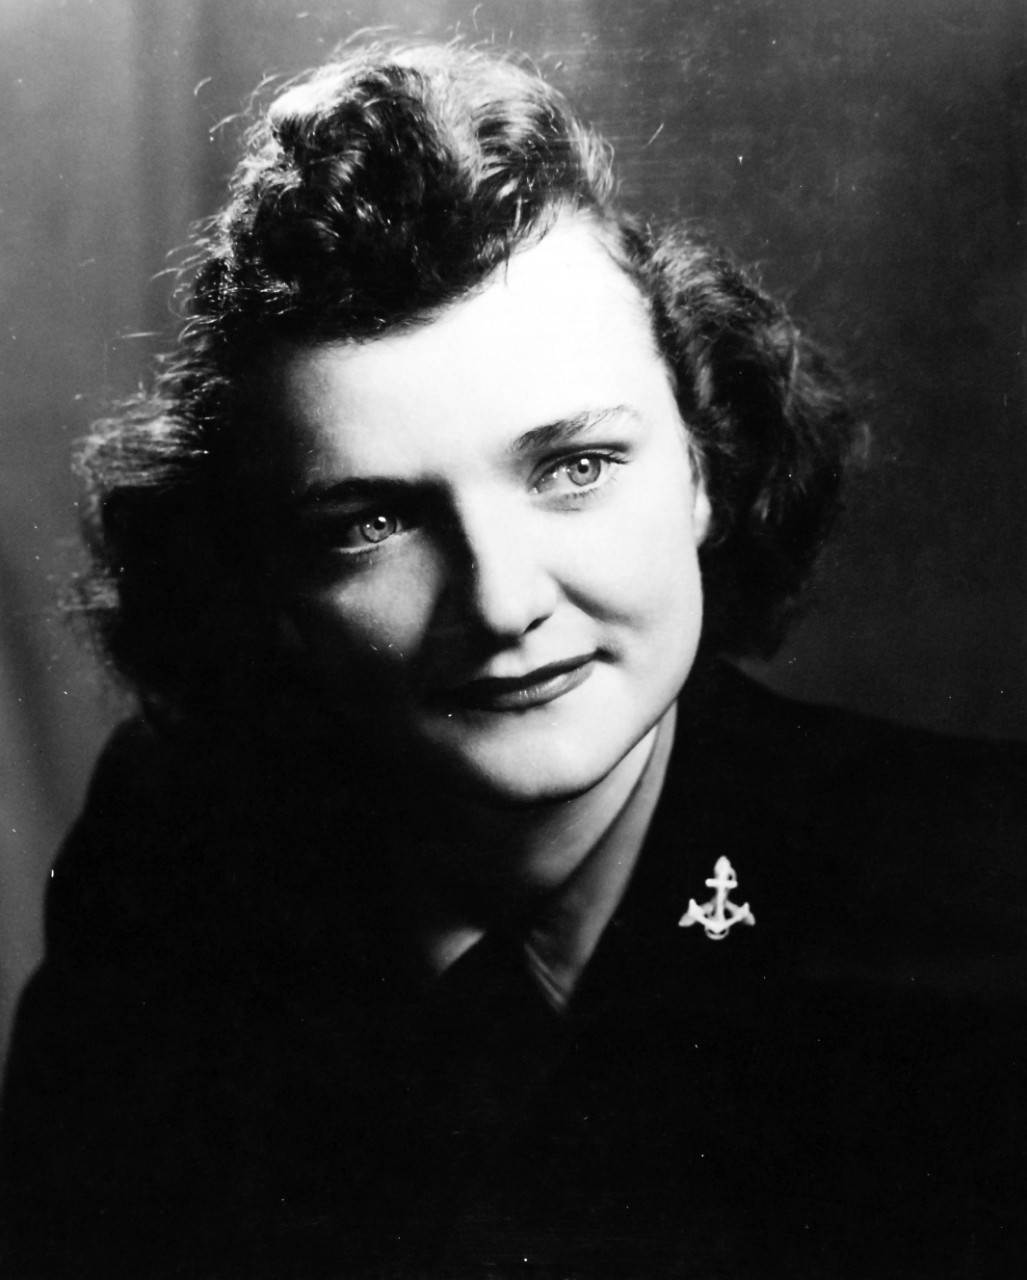 80-G-43425:  Ensign Jeanne R. Skinner, USNR, October 1943.   Service Dress Blue.  Portrait photograph, received October 22, 1943.  Official U.S. Navy photograph, now in the collections of the National Archives.  